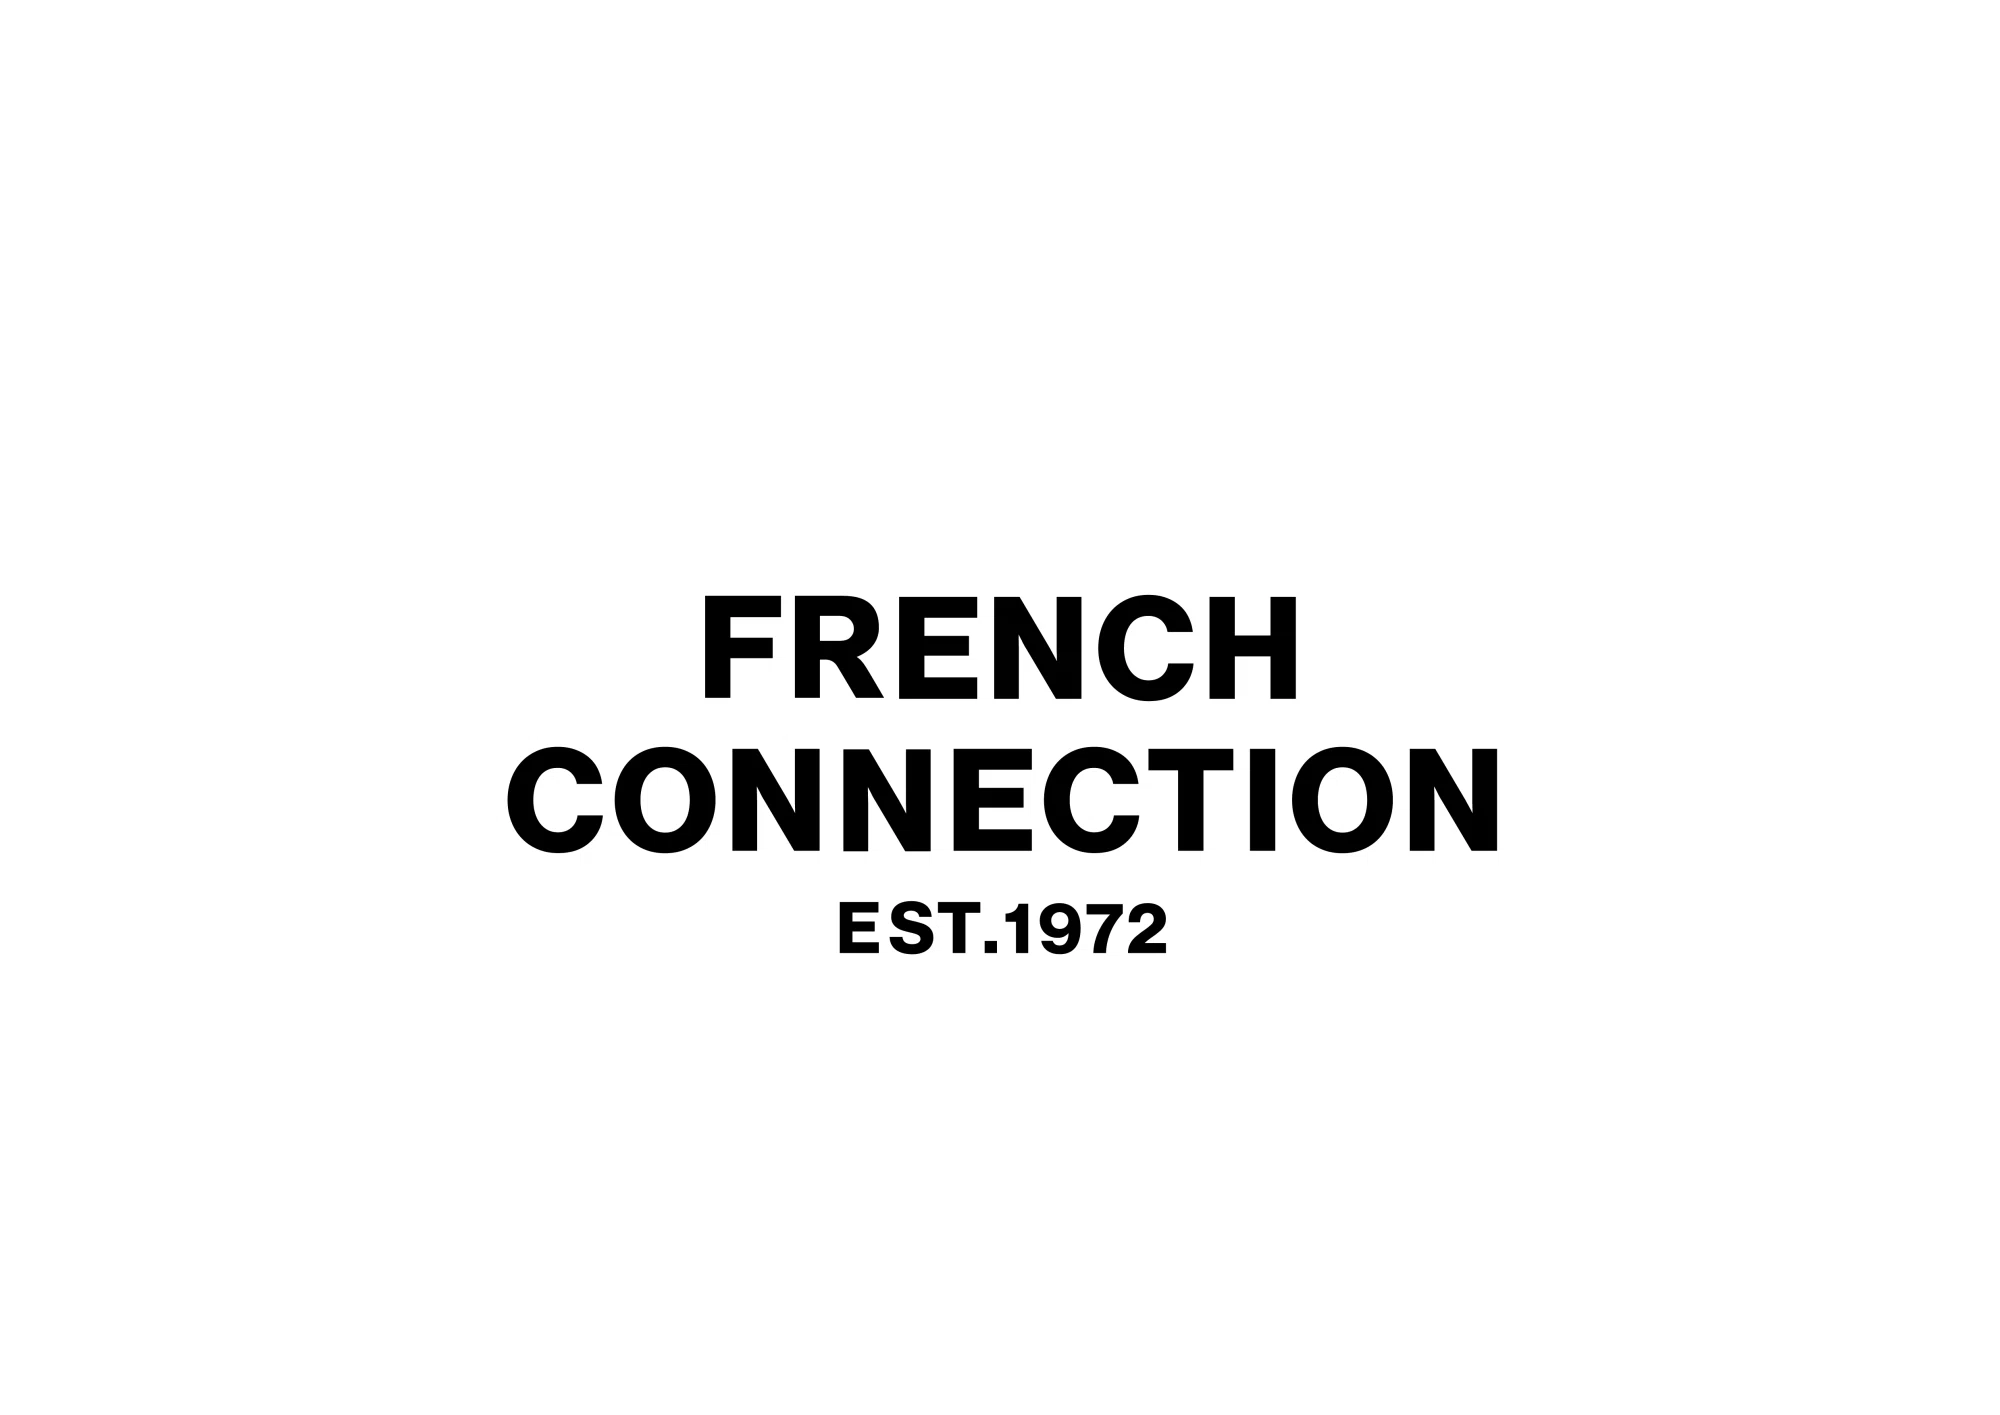 French Connection AU Review | Frenchconnection.com.au Ratings ...